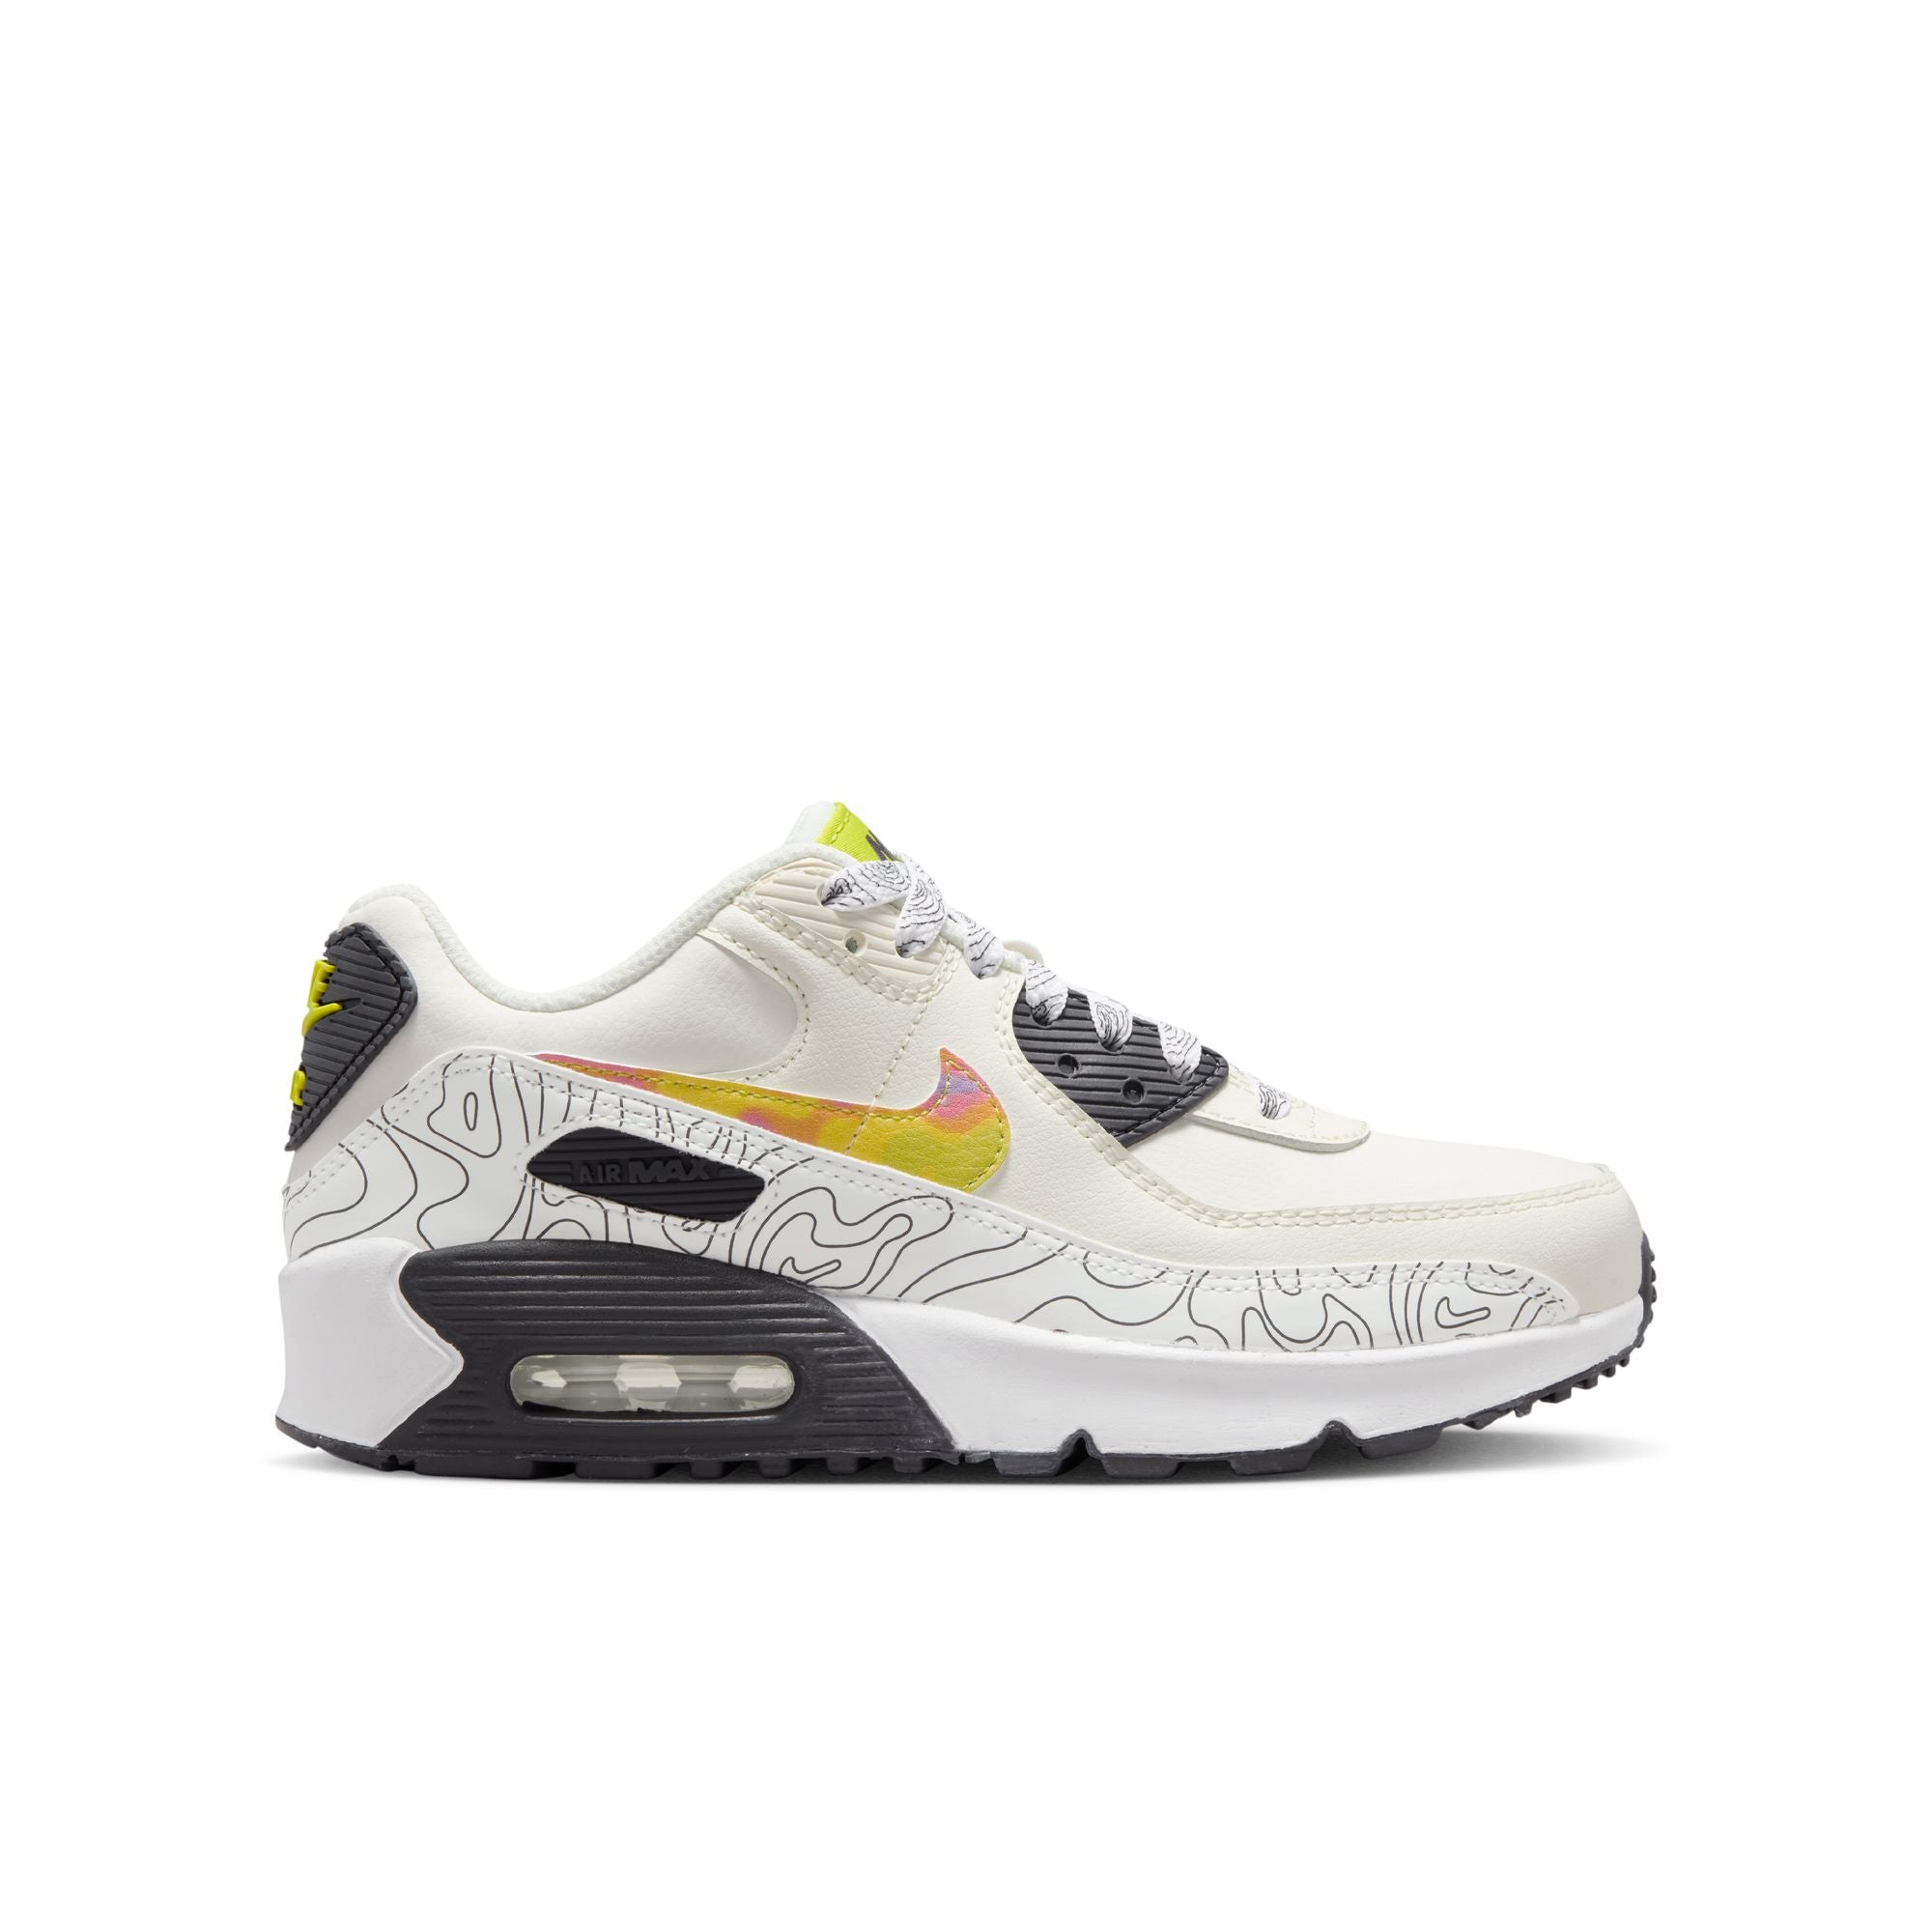 Nike Air 90 LTR SE (GS) - SoleFly